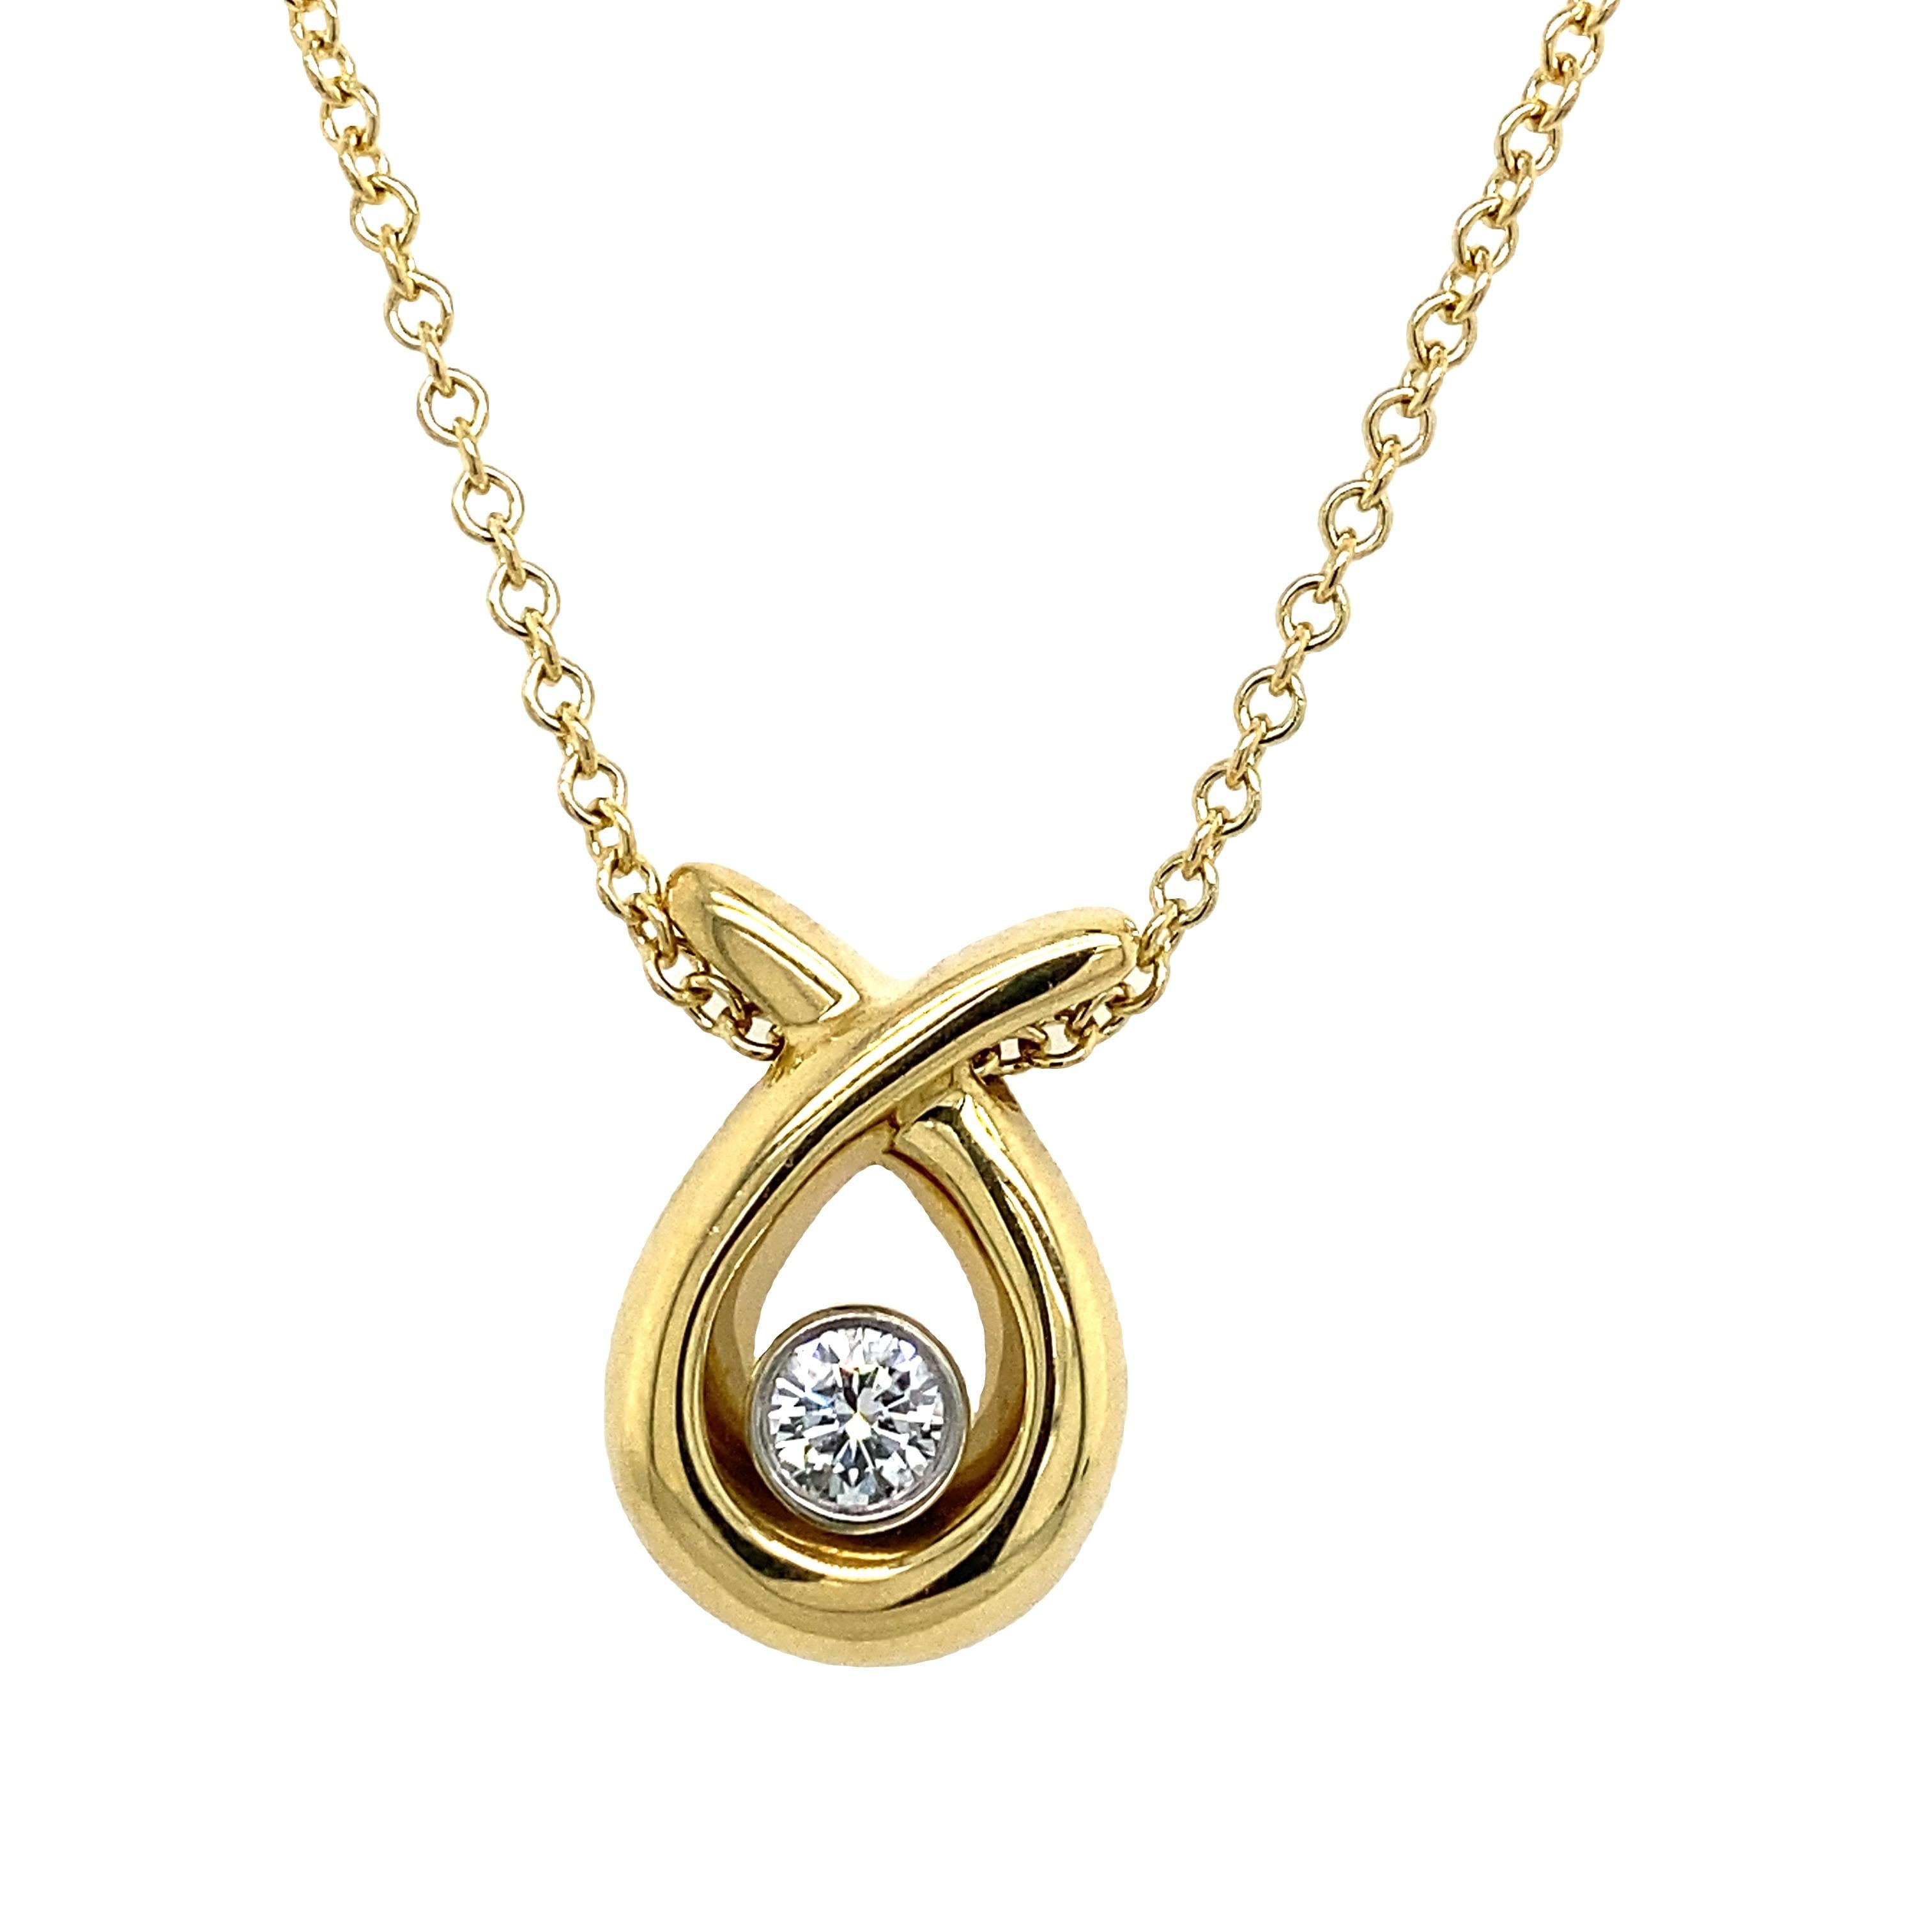 This necklace set features 1 natural round brilliant cut diamond with a total weight of 0.30ct. The diamond is set in 18ct yellow gold, and the total length of the necklace is 18 inches with adjustable at 16